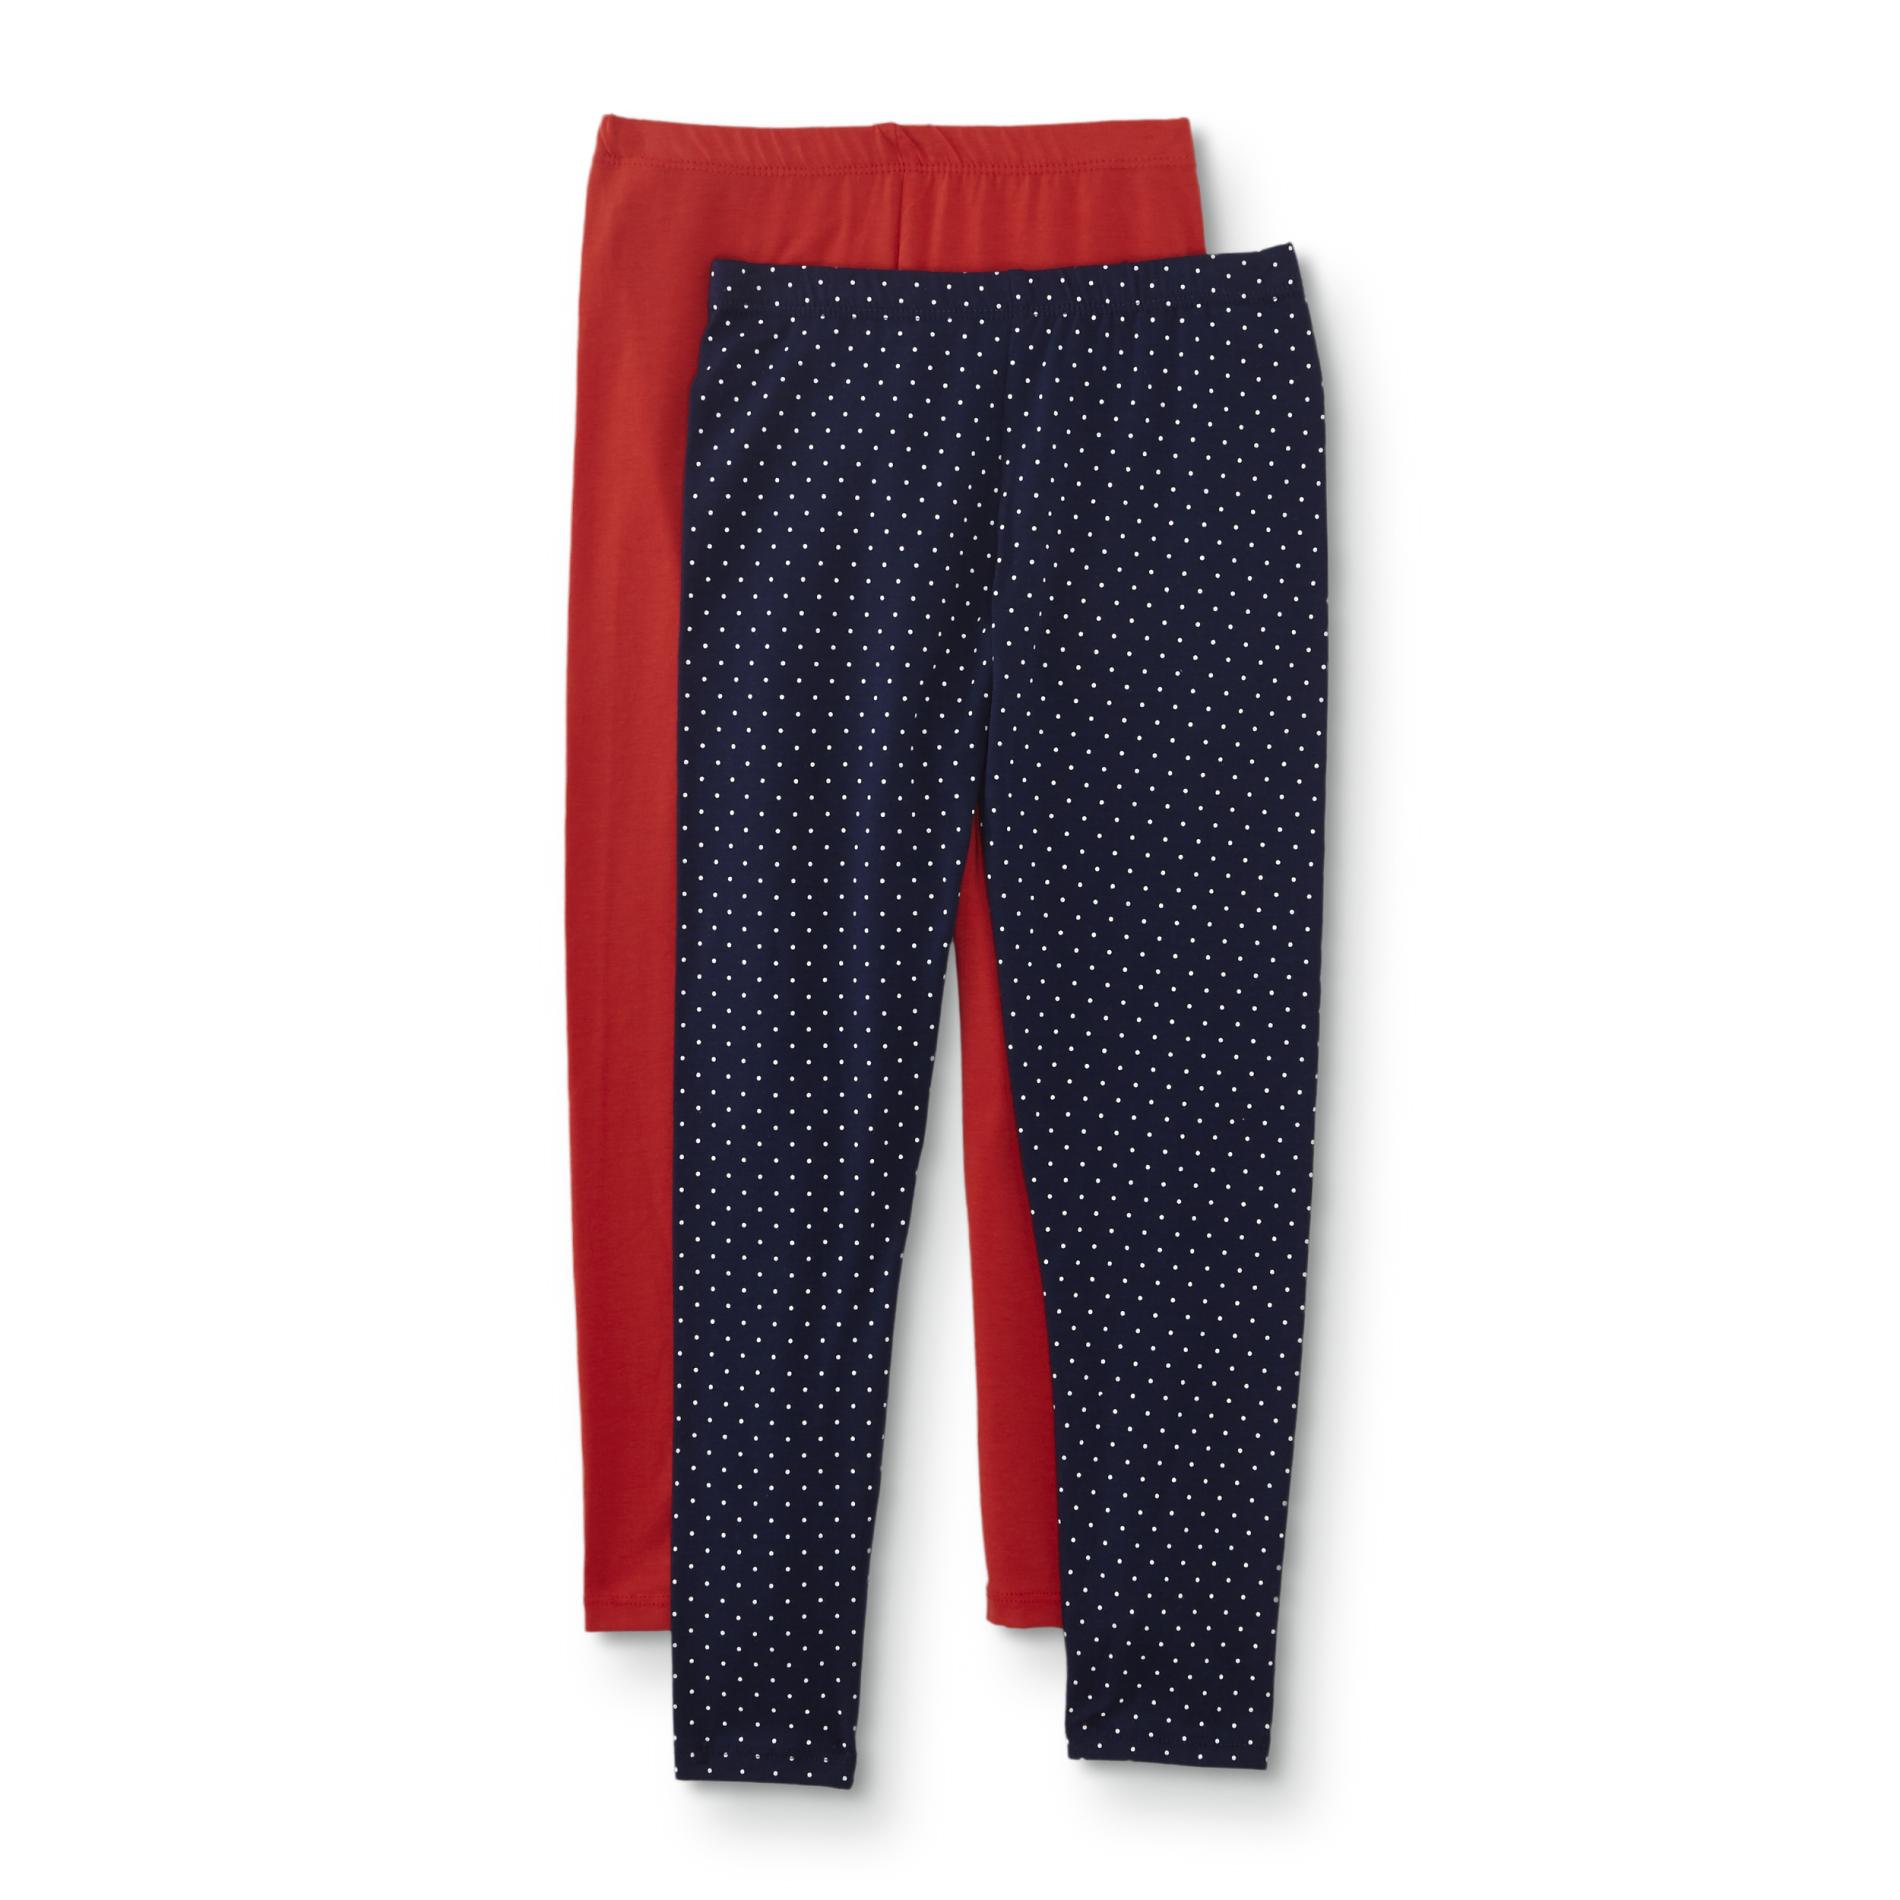 Simply Styled Girls' 2-Pack Leggings - Dots & Solid